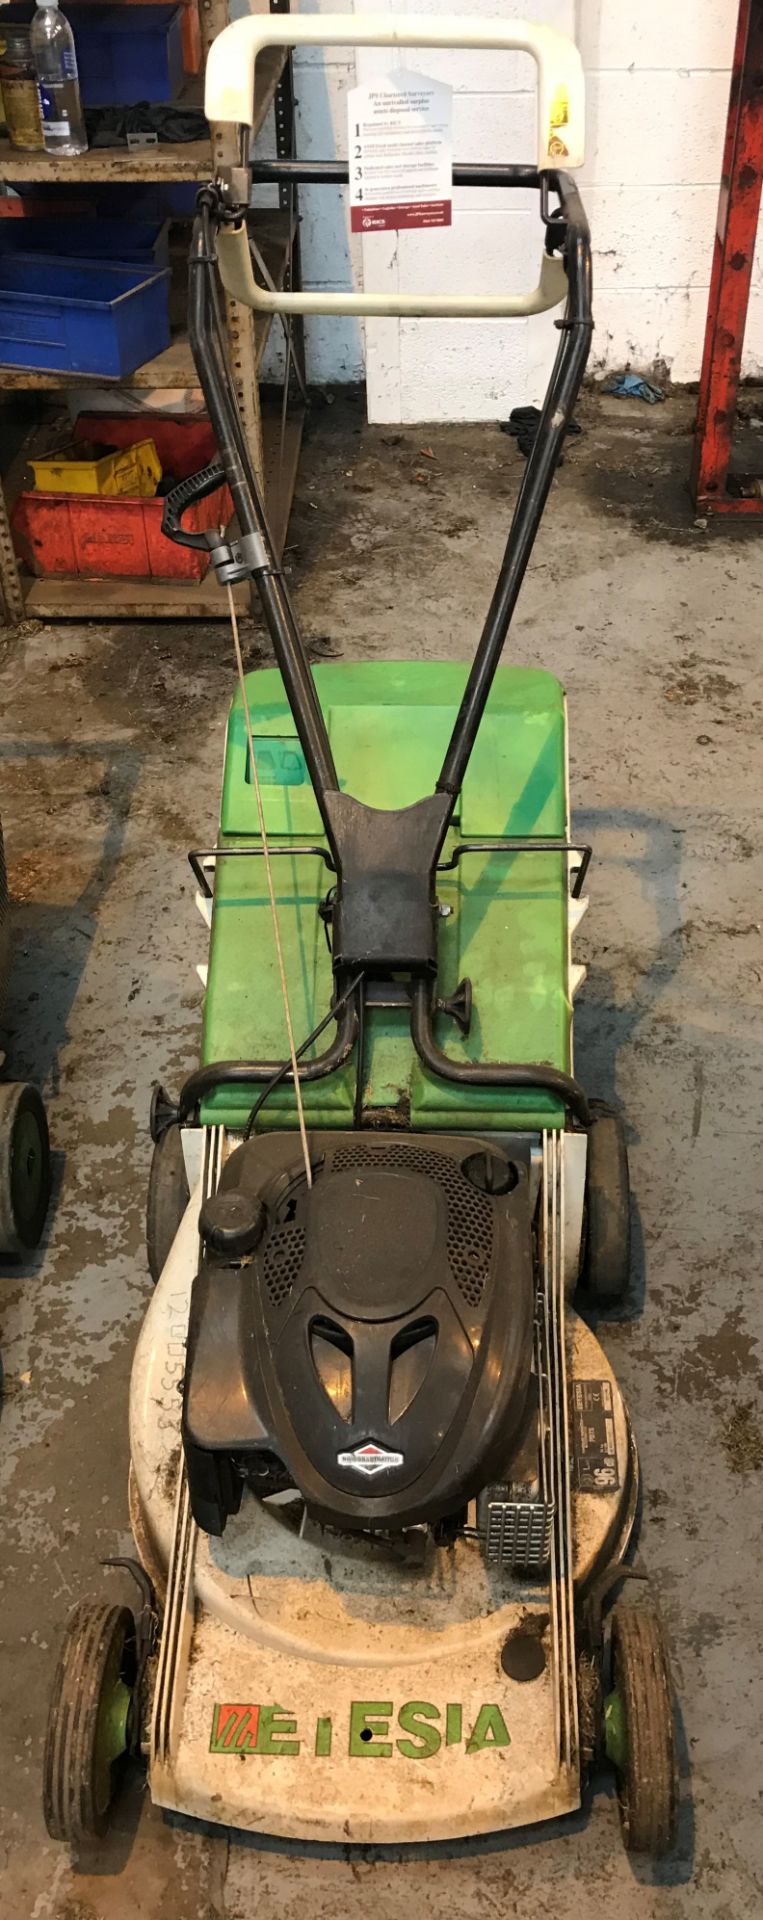 Etesia PBTS Self Propelled Commercial Lawn Mower | 2011